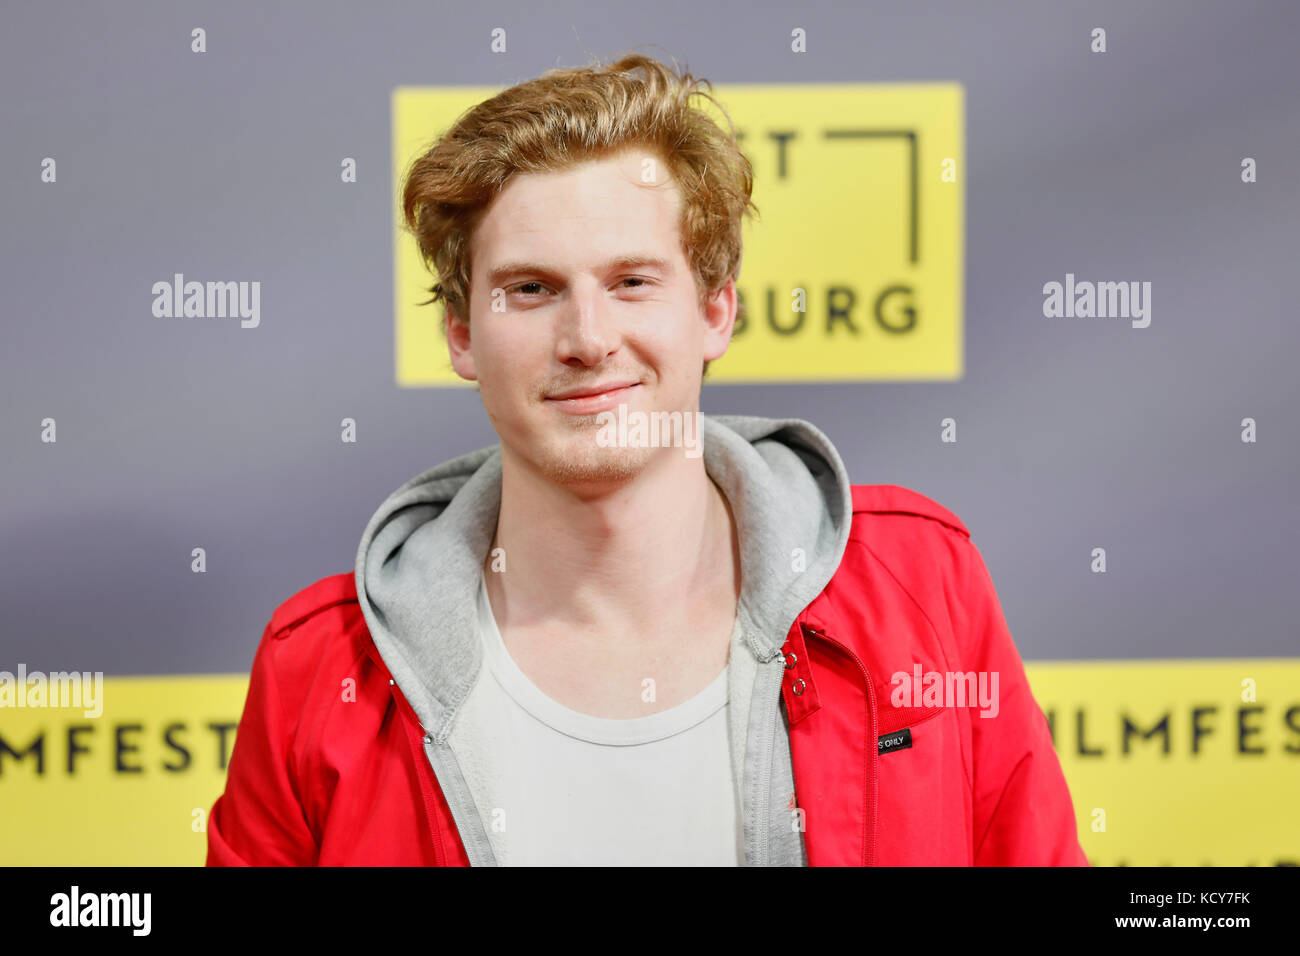 Hamburg, Germany. 7th Oct, 2017. The actor Felix Everding arrives for the German premiere of the film 'Reich oder tot' during the Hamburg Film Festival in Hamburg, Germany, 7 October 2017. Credit: Georg Wendt/dpa/Alamy Live News Stock Photo